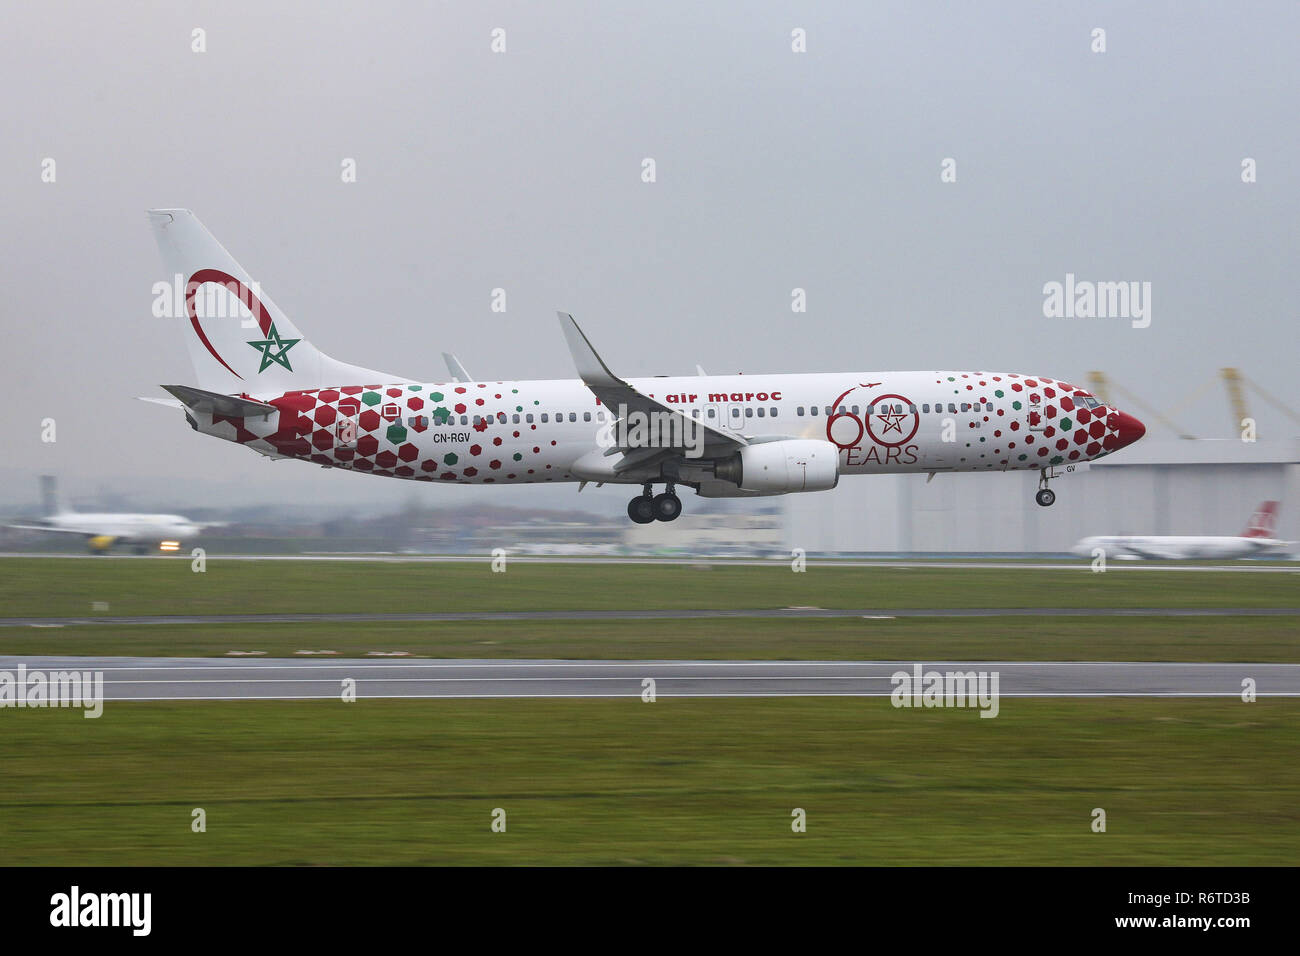 December 1, 2017 - Brussels, Belgium - The Royal Air Maroc or RAM Boeing 737-800 is seen landing at the Brussels International Airport in Belgium, known as Brussels National or Zavantem Airport with IATA / ICAO codes BRU and EBBR.. The aircraft is a Boeing 737-800 with registration CN-RGV and is painted in special scheme ''60 years'' livery. RAM connects Brussels to Casablanca, Nador, Rabat, Tangier and seasonal to Al Hoceima and Oujda. (Credit Image: © Nicolas Economou/SOPA Images via ZUMA Wire) Stock Photo